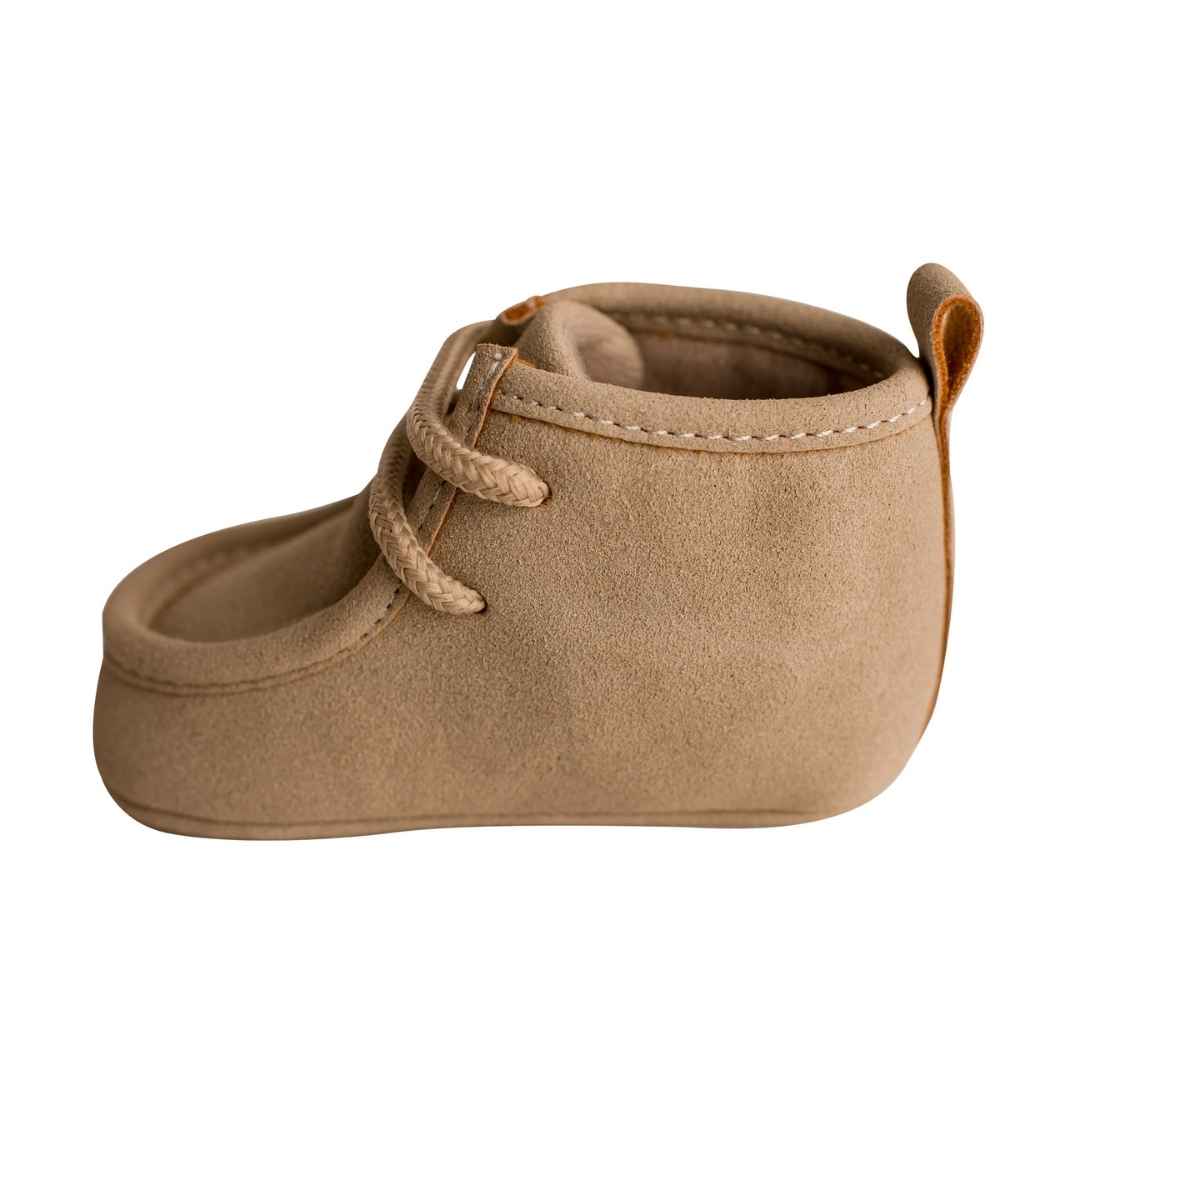 Wally Infant Soft Sole Wallabee Booties | Tan